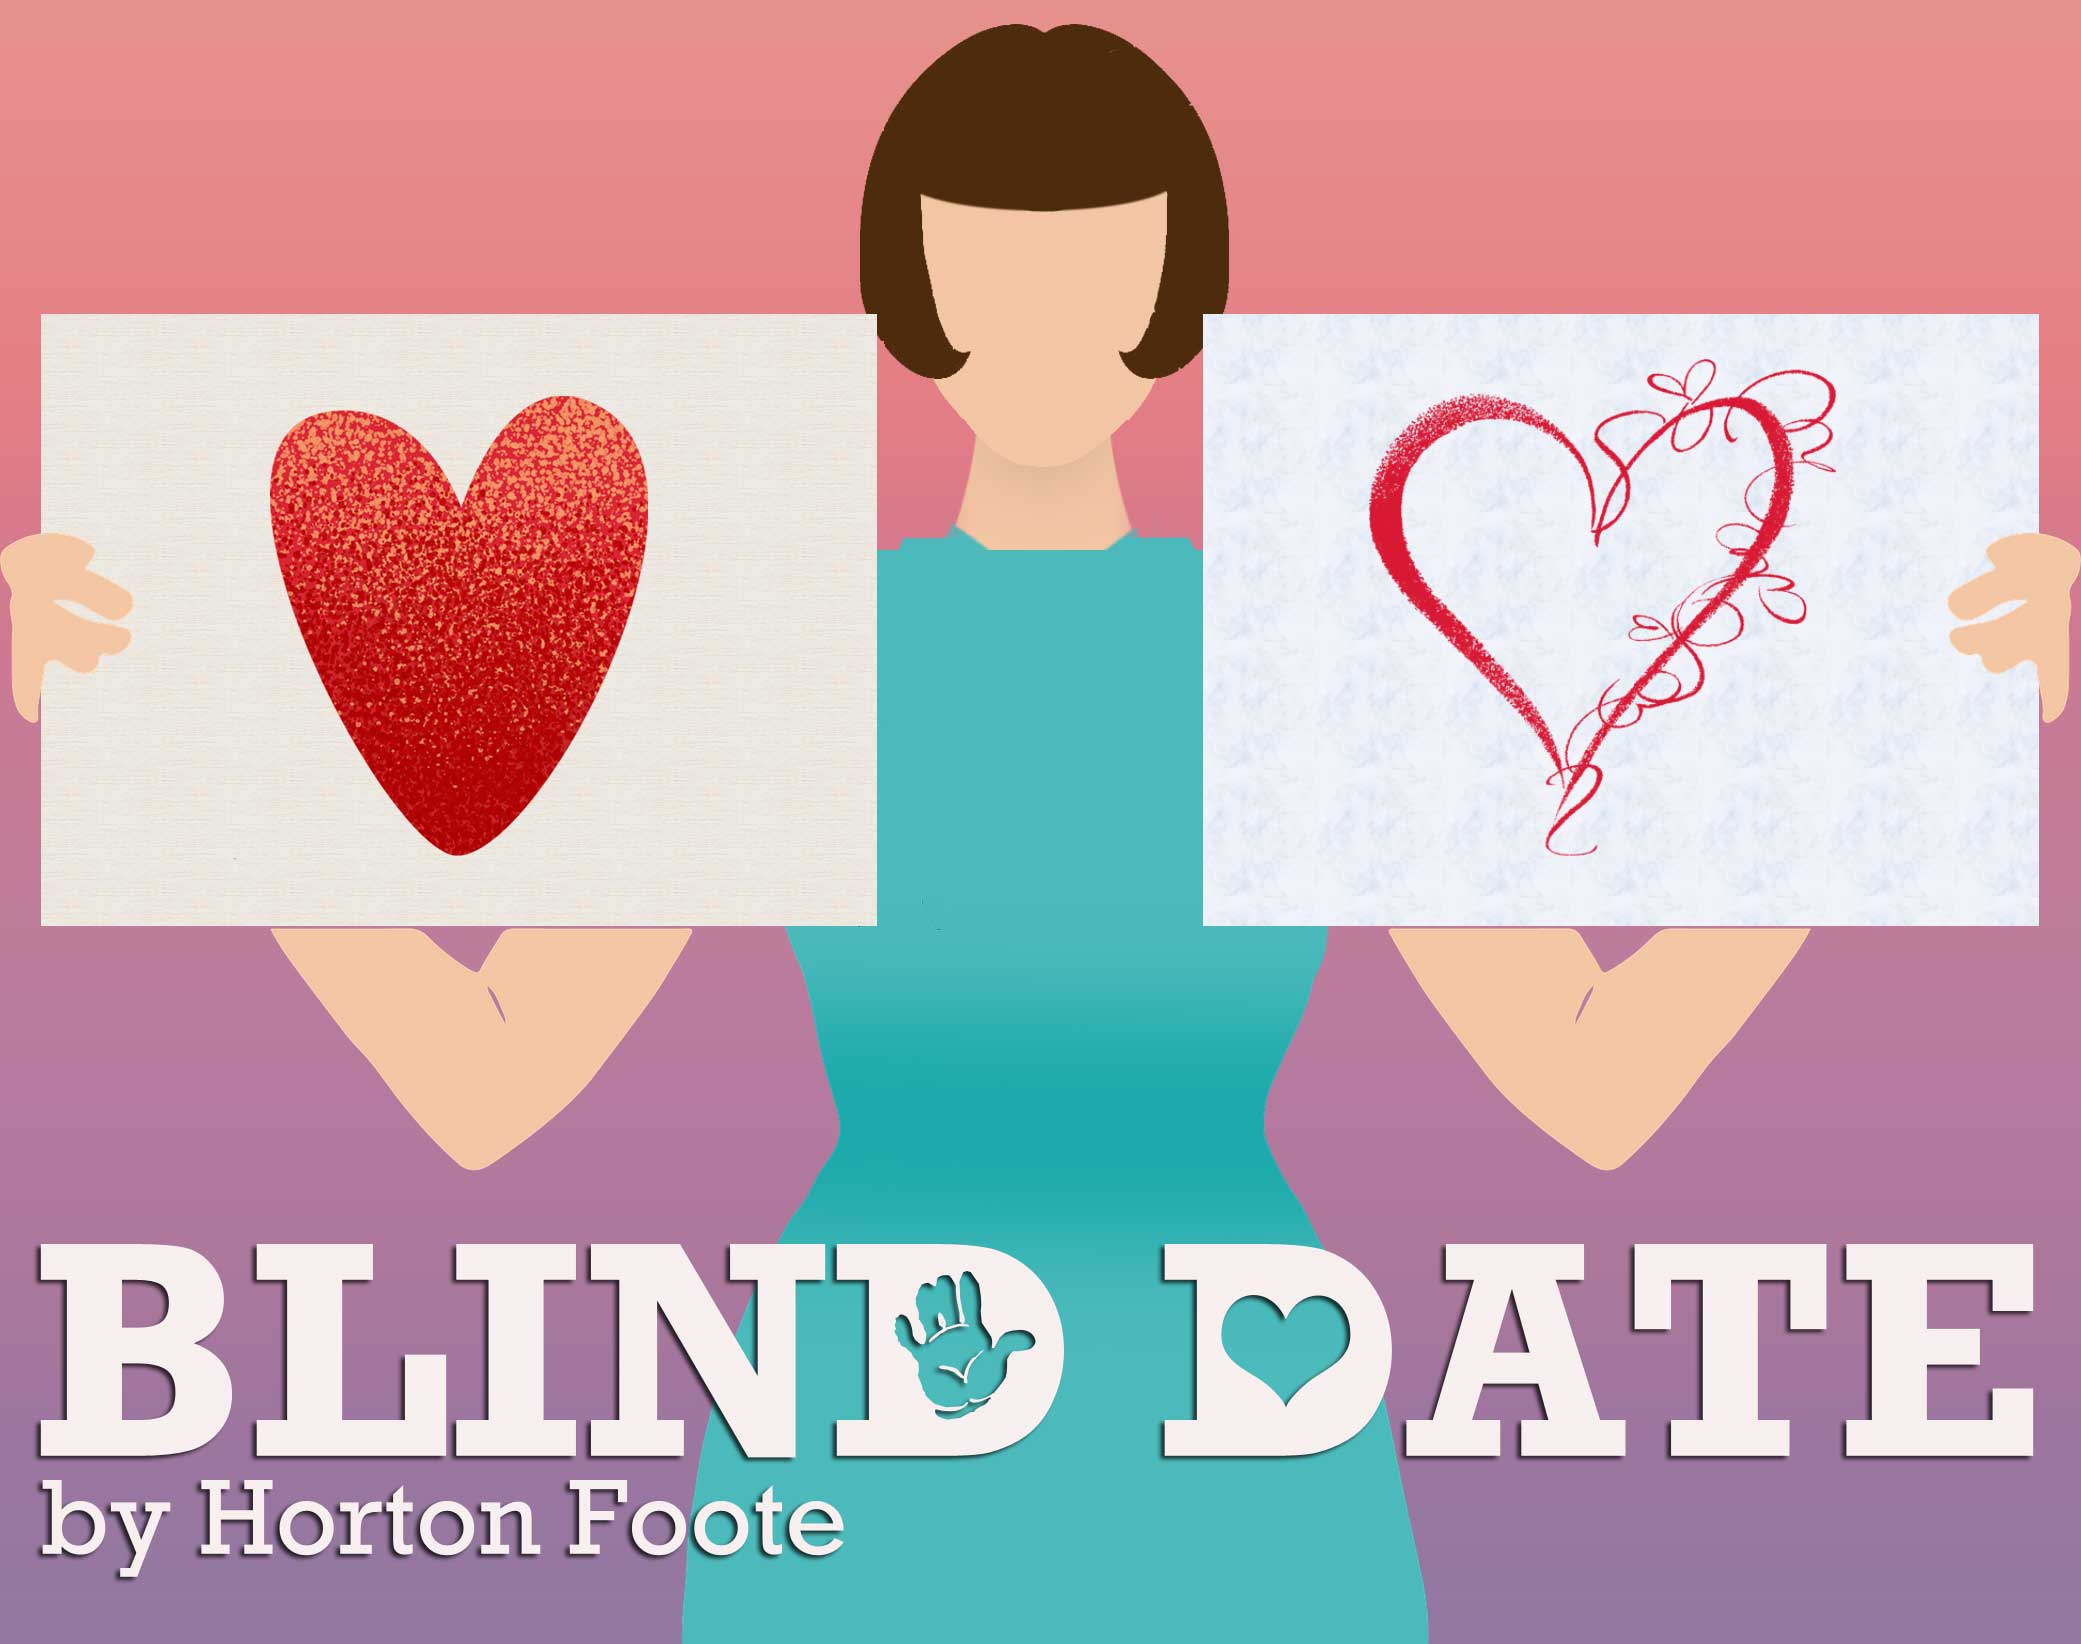 Blind Date by Horton Foote